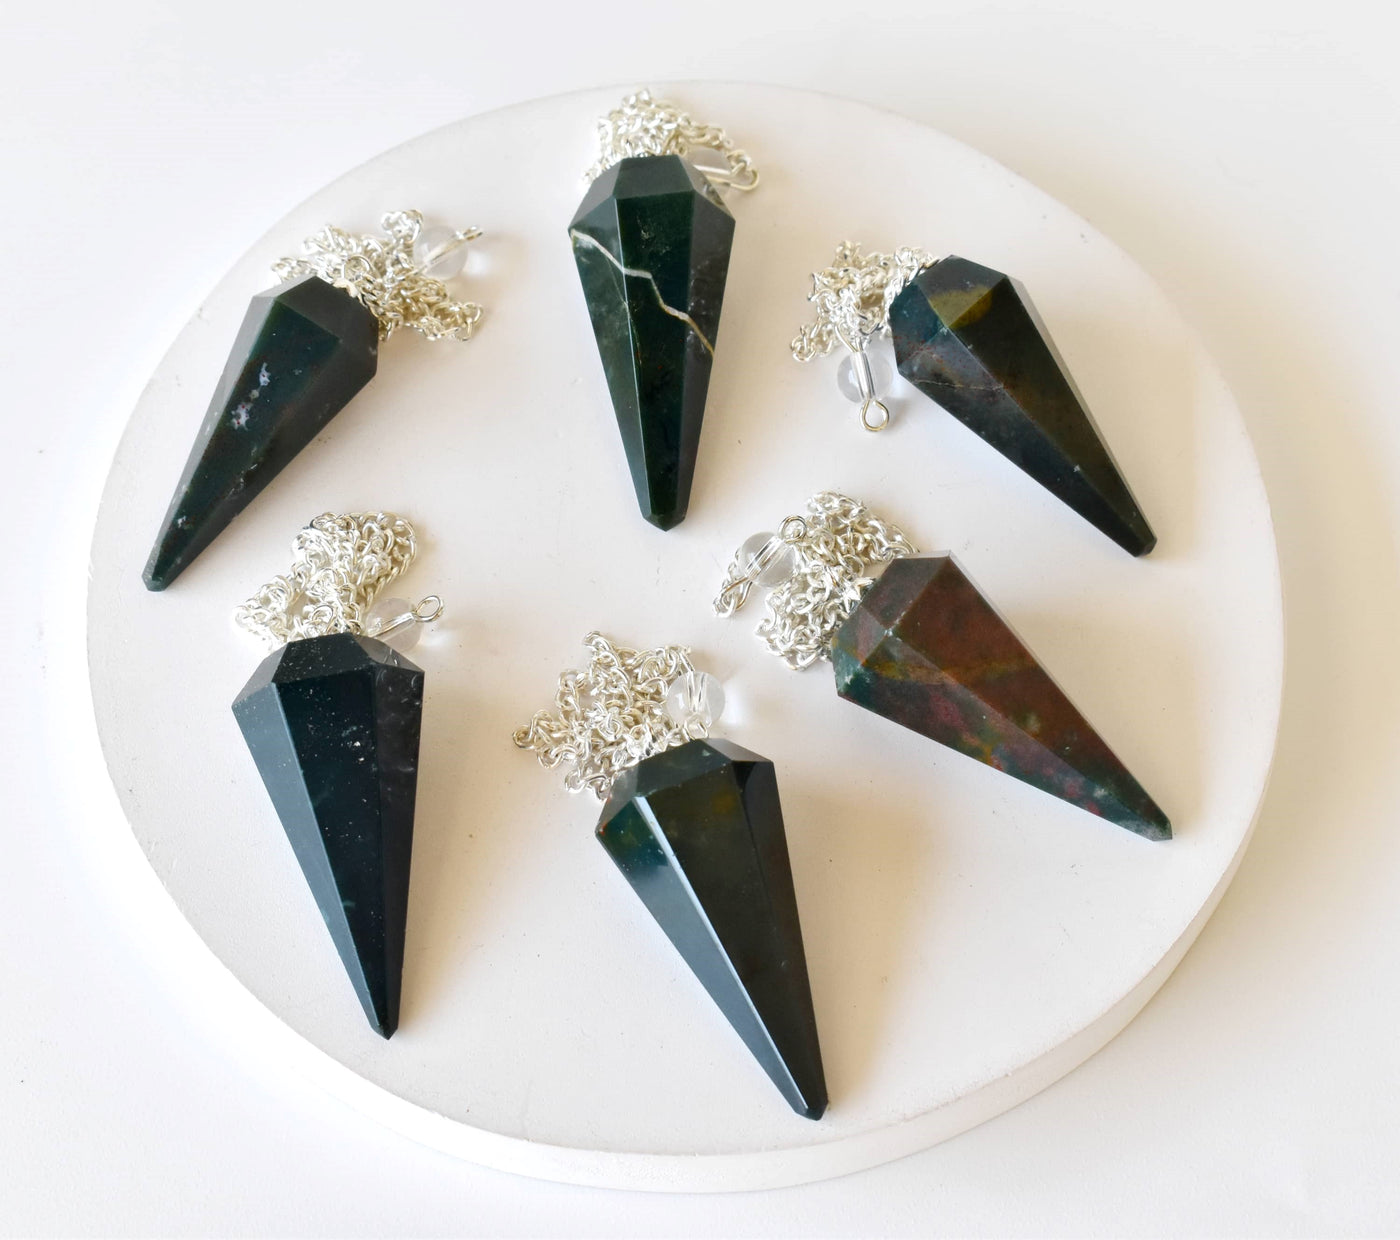 Bloodstone Pendulum (Protection and Strength)